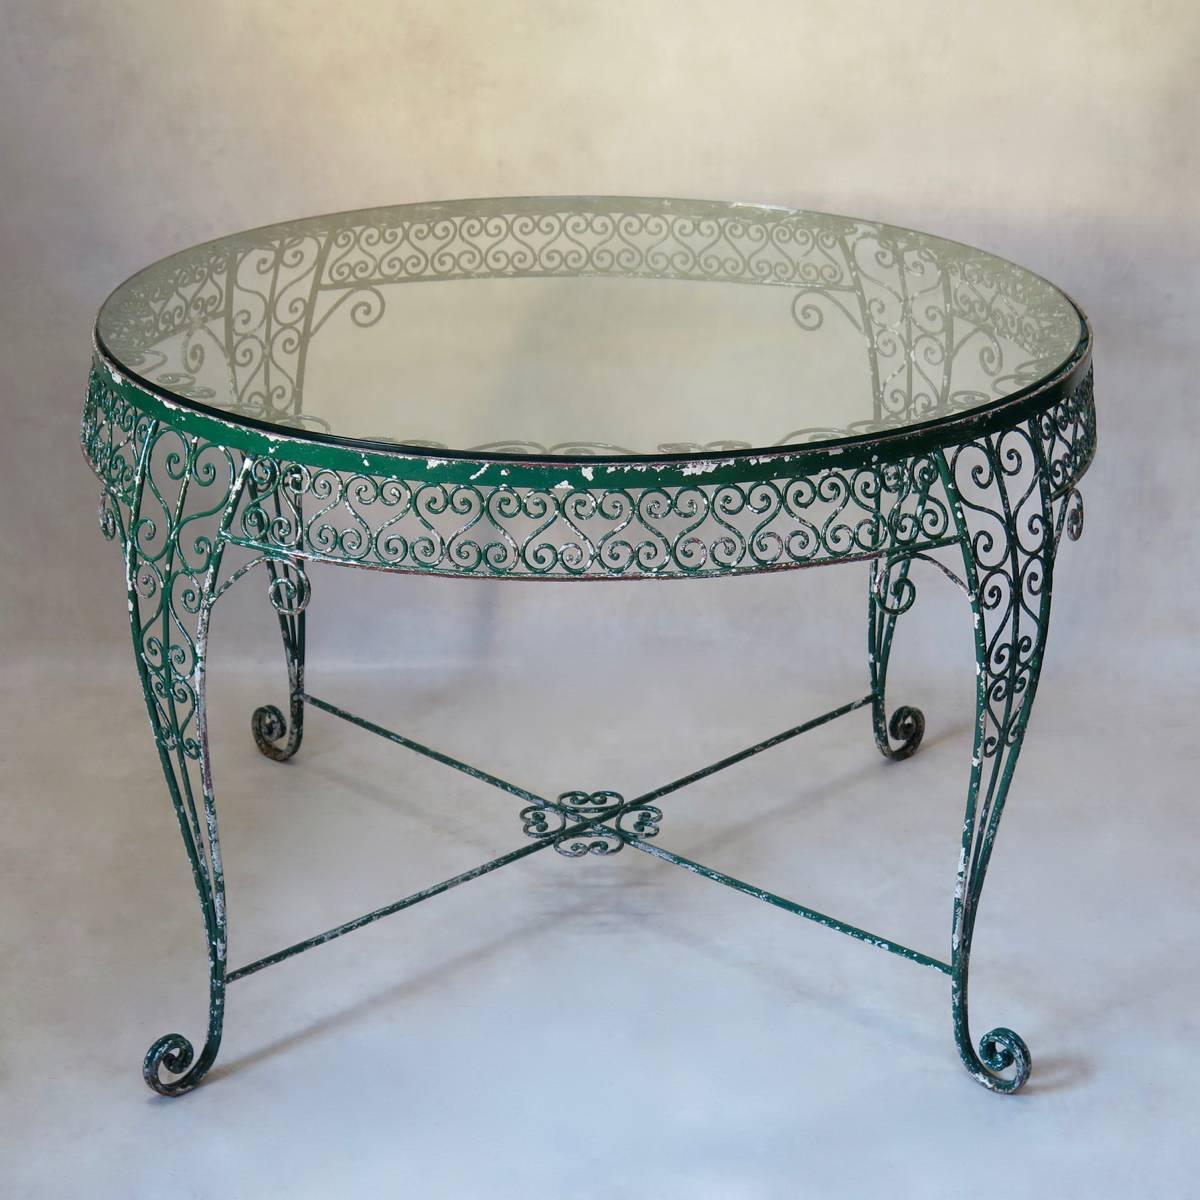 Very elegant and unusual garden set comprising a large, round table and three chairs. Made of wrought iron, with original green paint. The table has a very intricate arabesque motif, and is raised on cabriole legs. The thick glass top slots into the